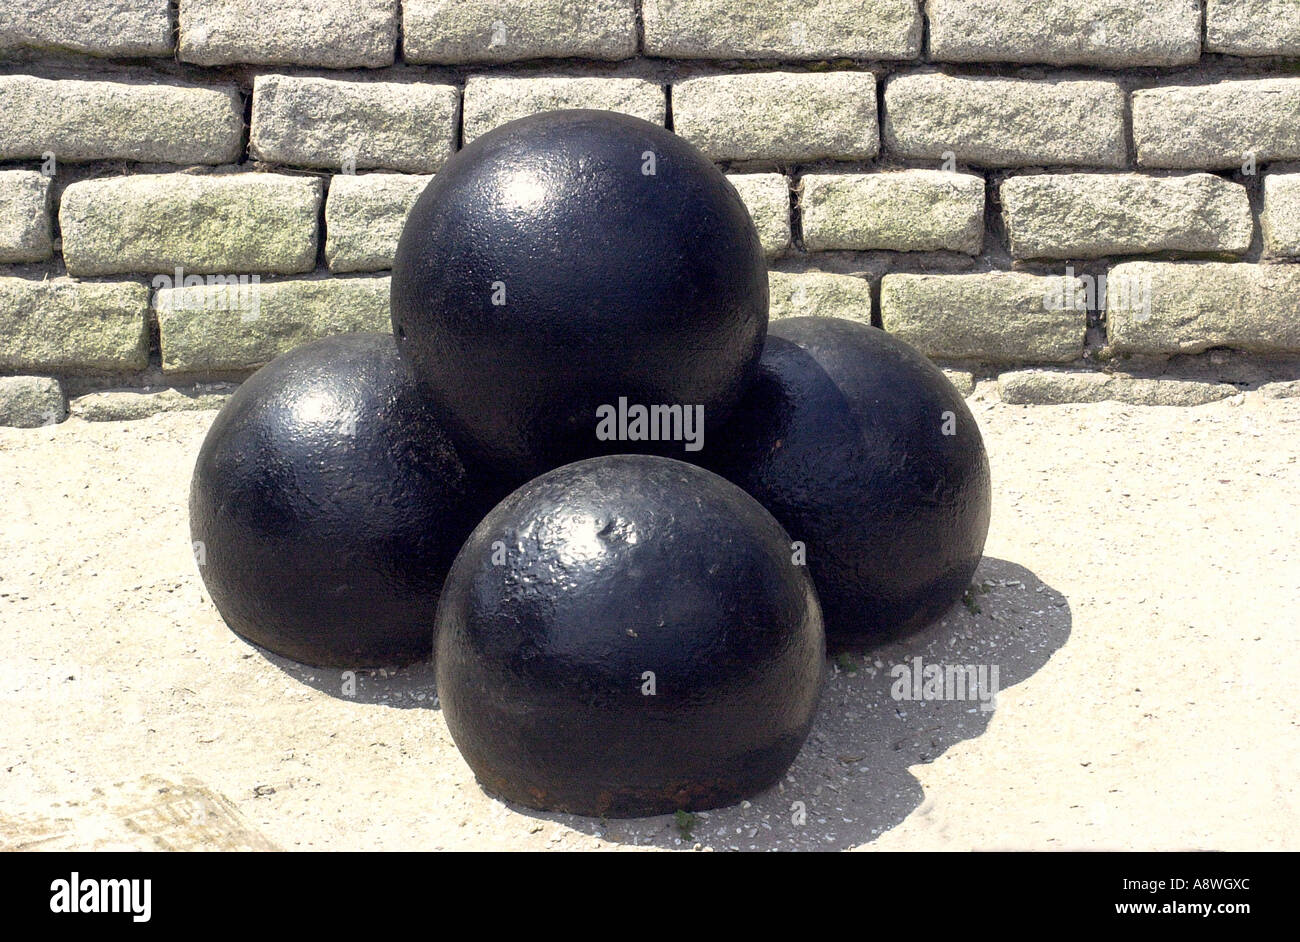 Cannonballs like those fired at Fort Sumter displayed at Fort Moultrie on Sullivan's Island Charleston  South Carolina. Digital photograph Stock Photo